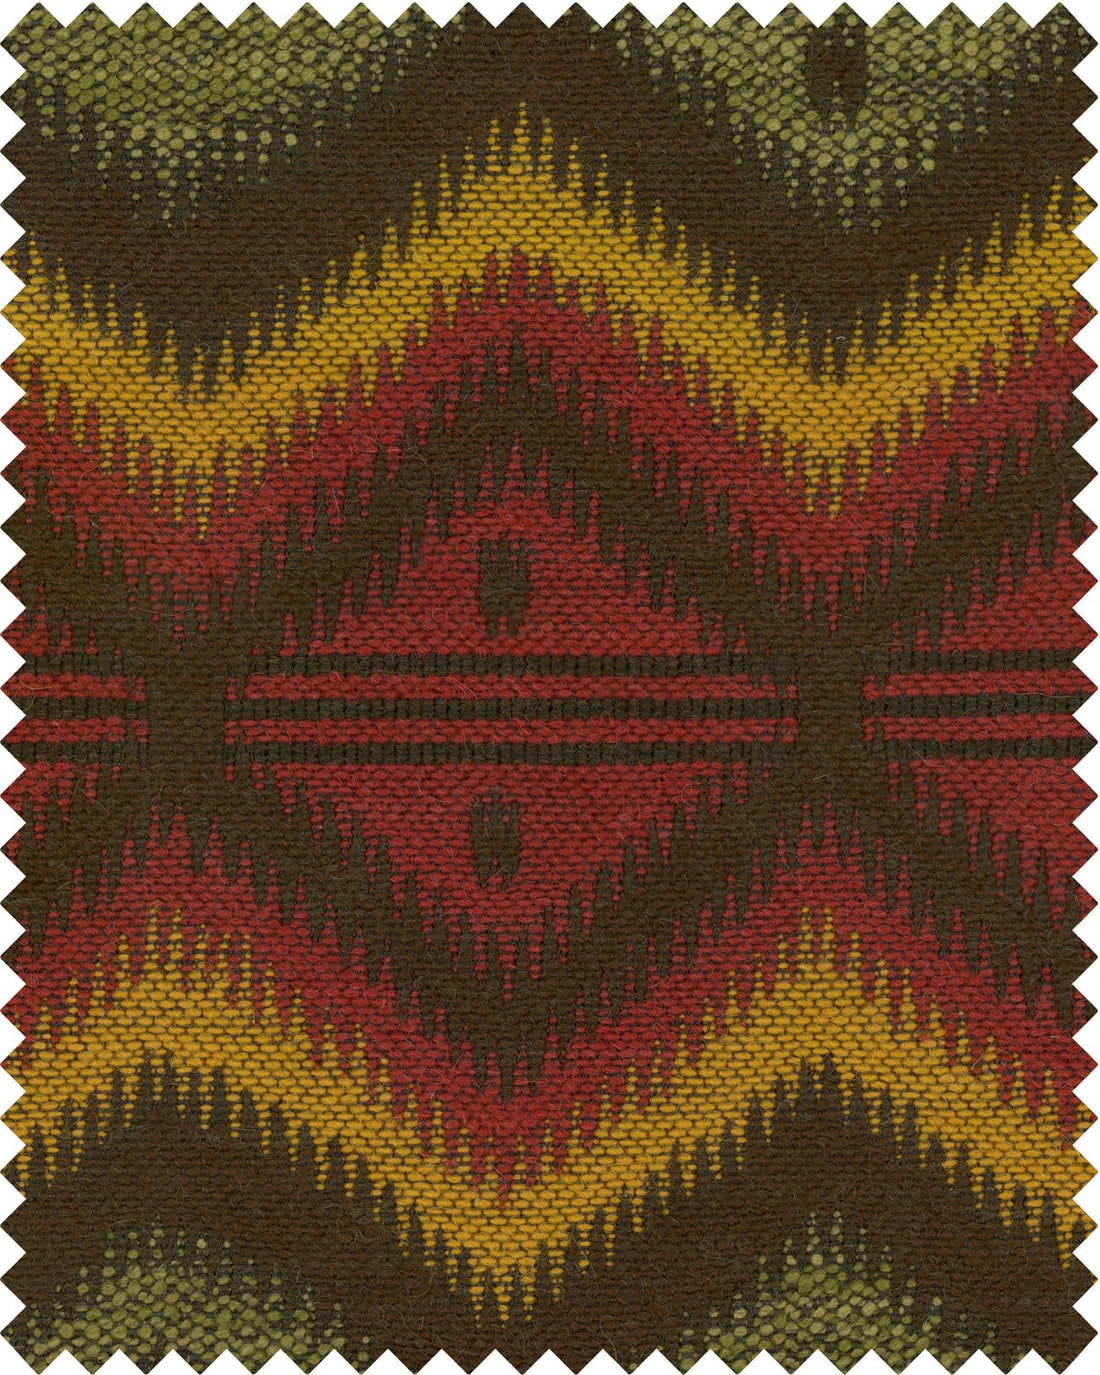 Pyramidenspitze fabric in green red yellow color - pattern number FB00111 - by Mind The Gap in the Tyrol Apres-ski Home Collection collection